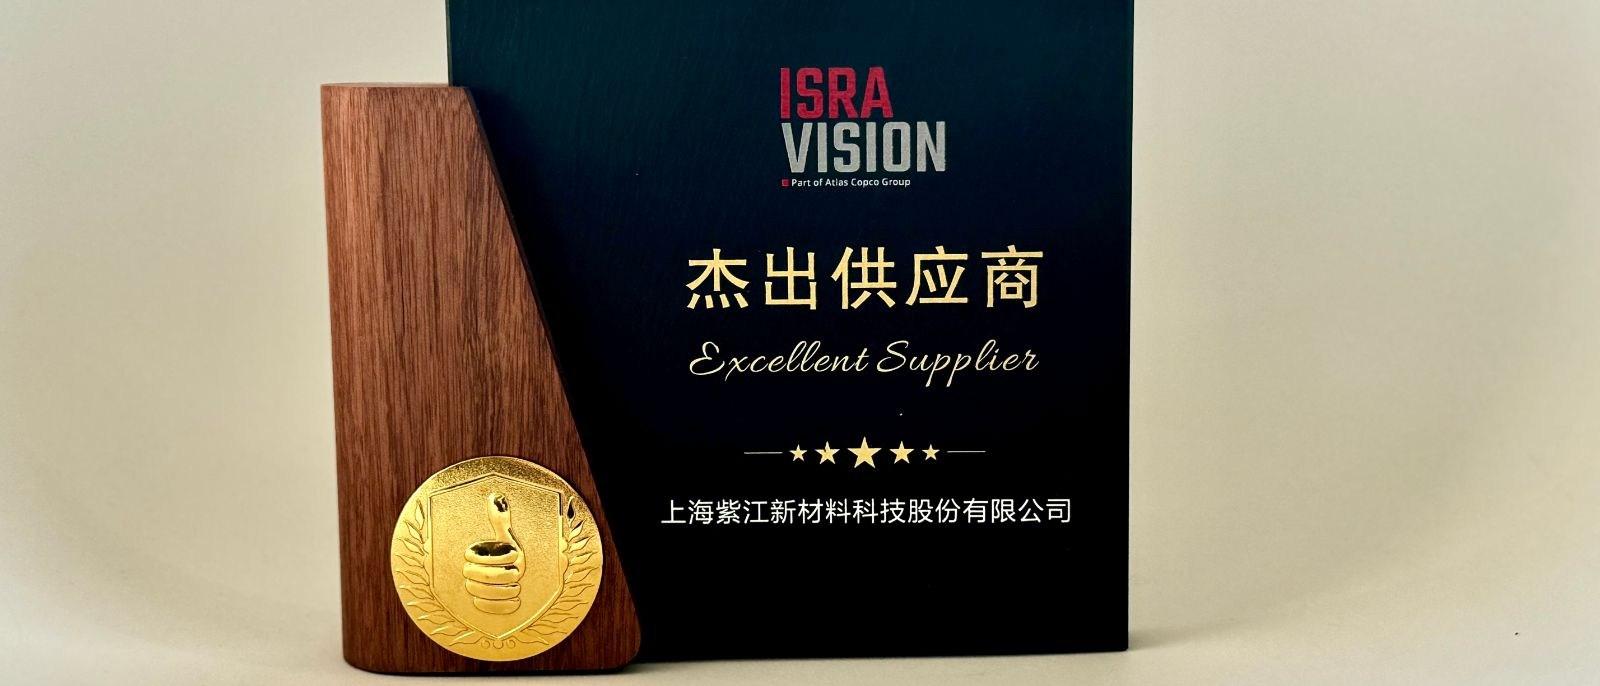 "Outstanding Supplier" award by the Chinese company Zijiang New Material (Zijiang).